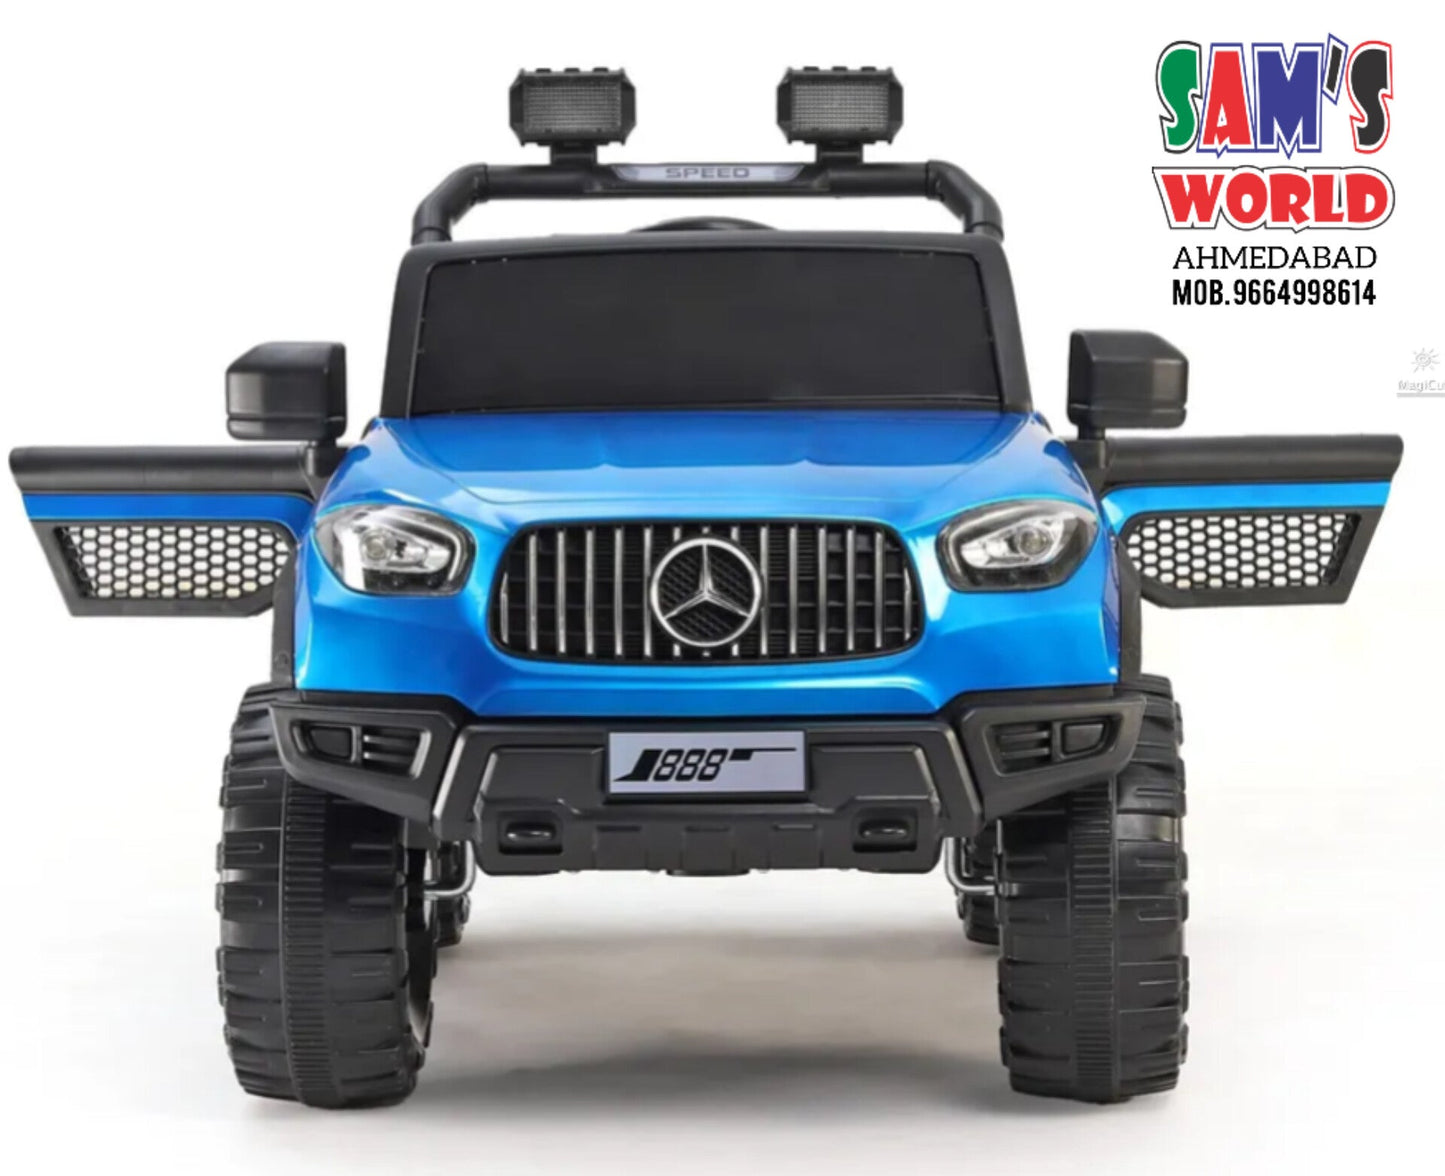 2024 Mercedes Kids ride on Jeep With Windshield 3D Light Battery Operated SUV 888 | Sams Toy samstoy.in Sams toy world Ahmedabad 